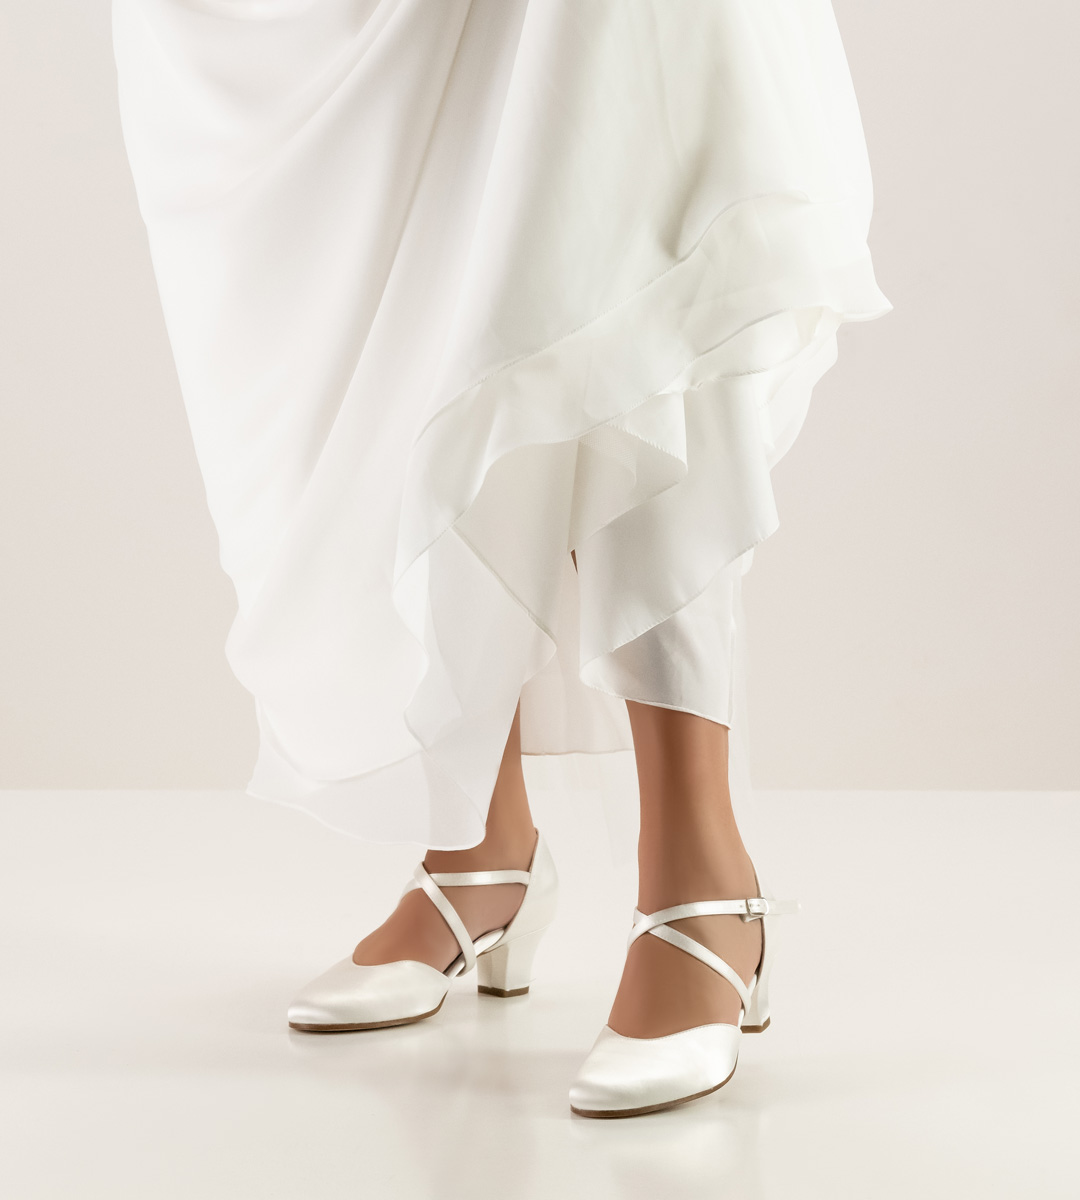 Werner Kern Bridal Shoe in Satin with Leather Sole